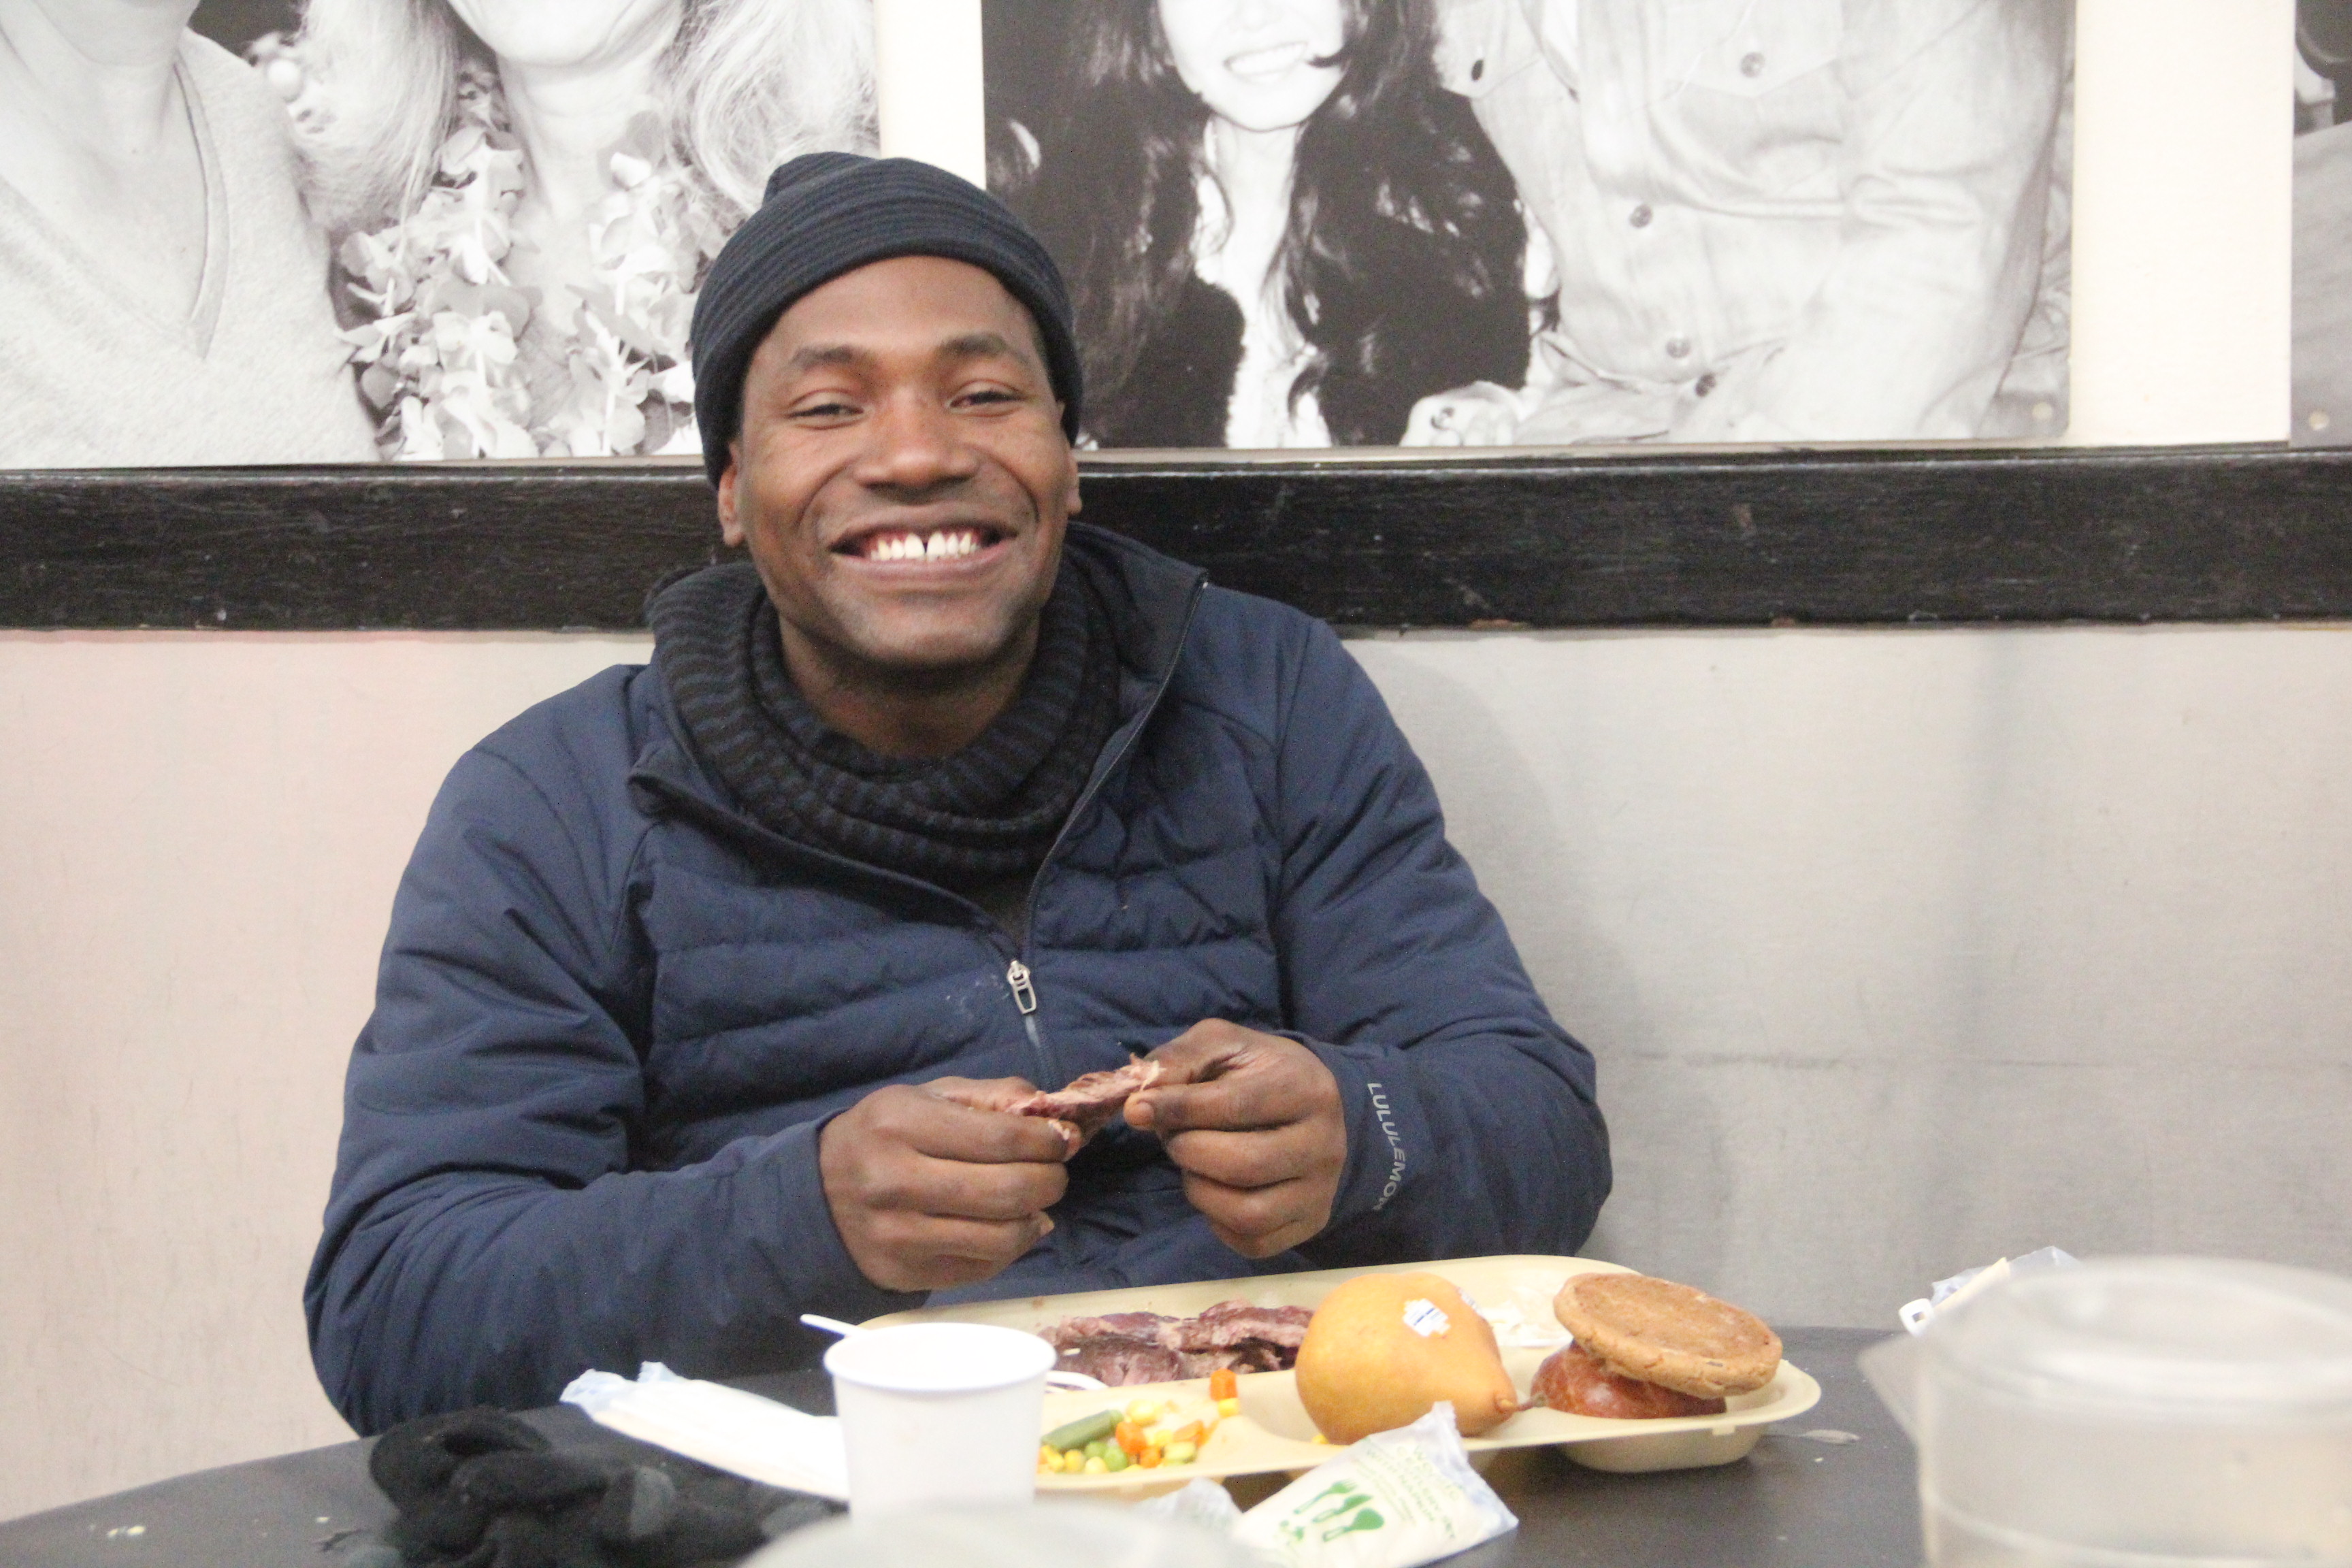 A man with a plate of food smiles.